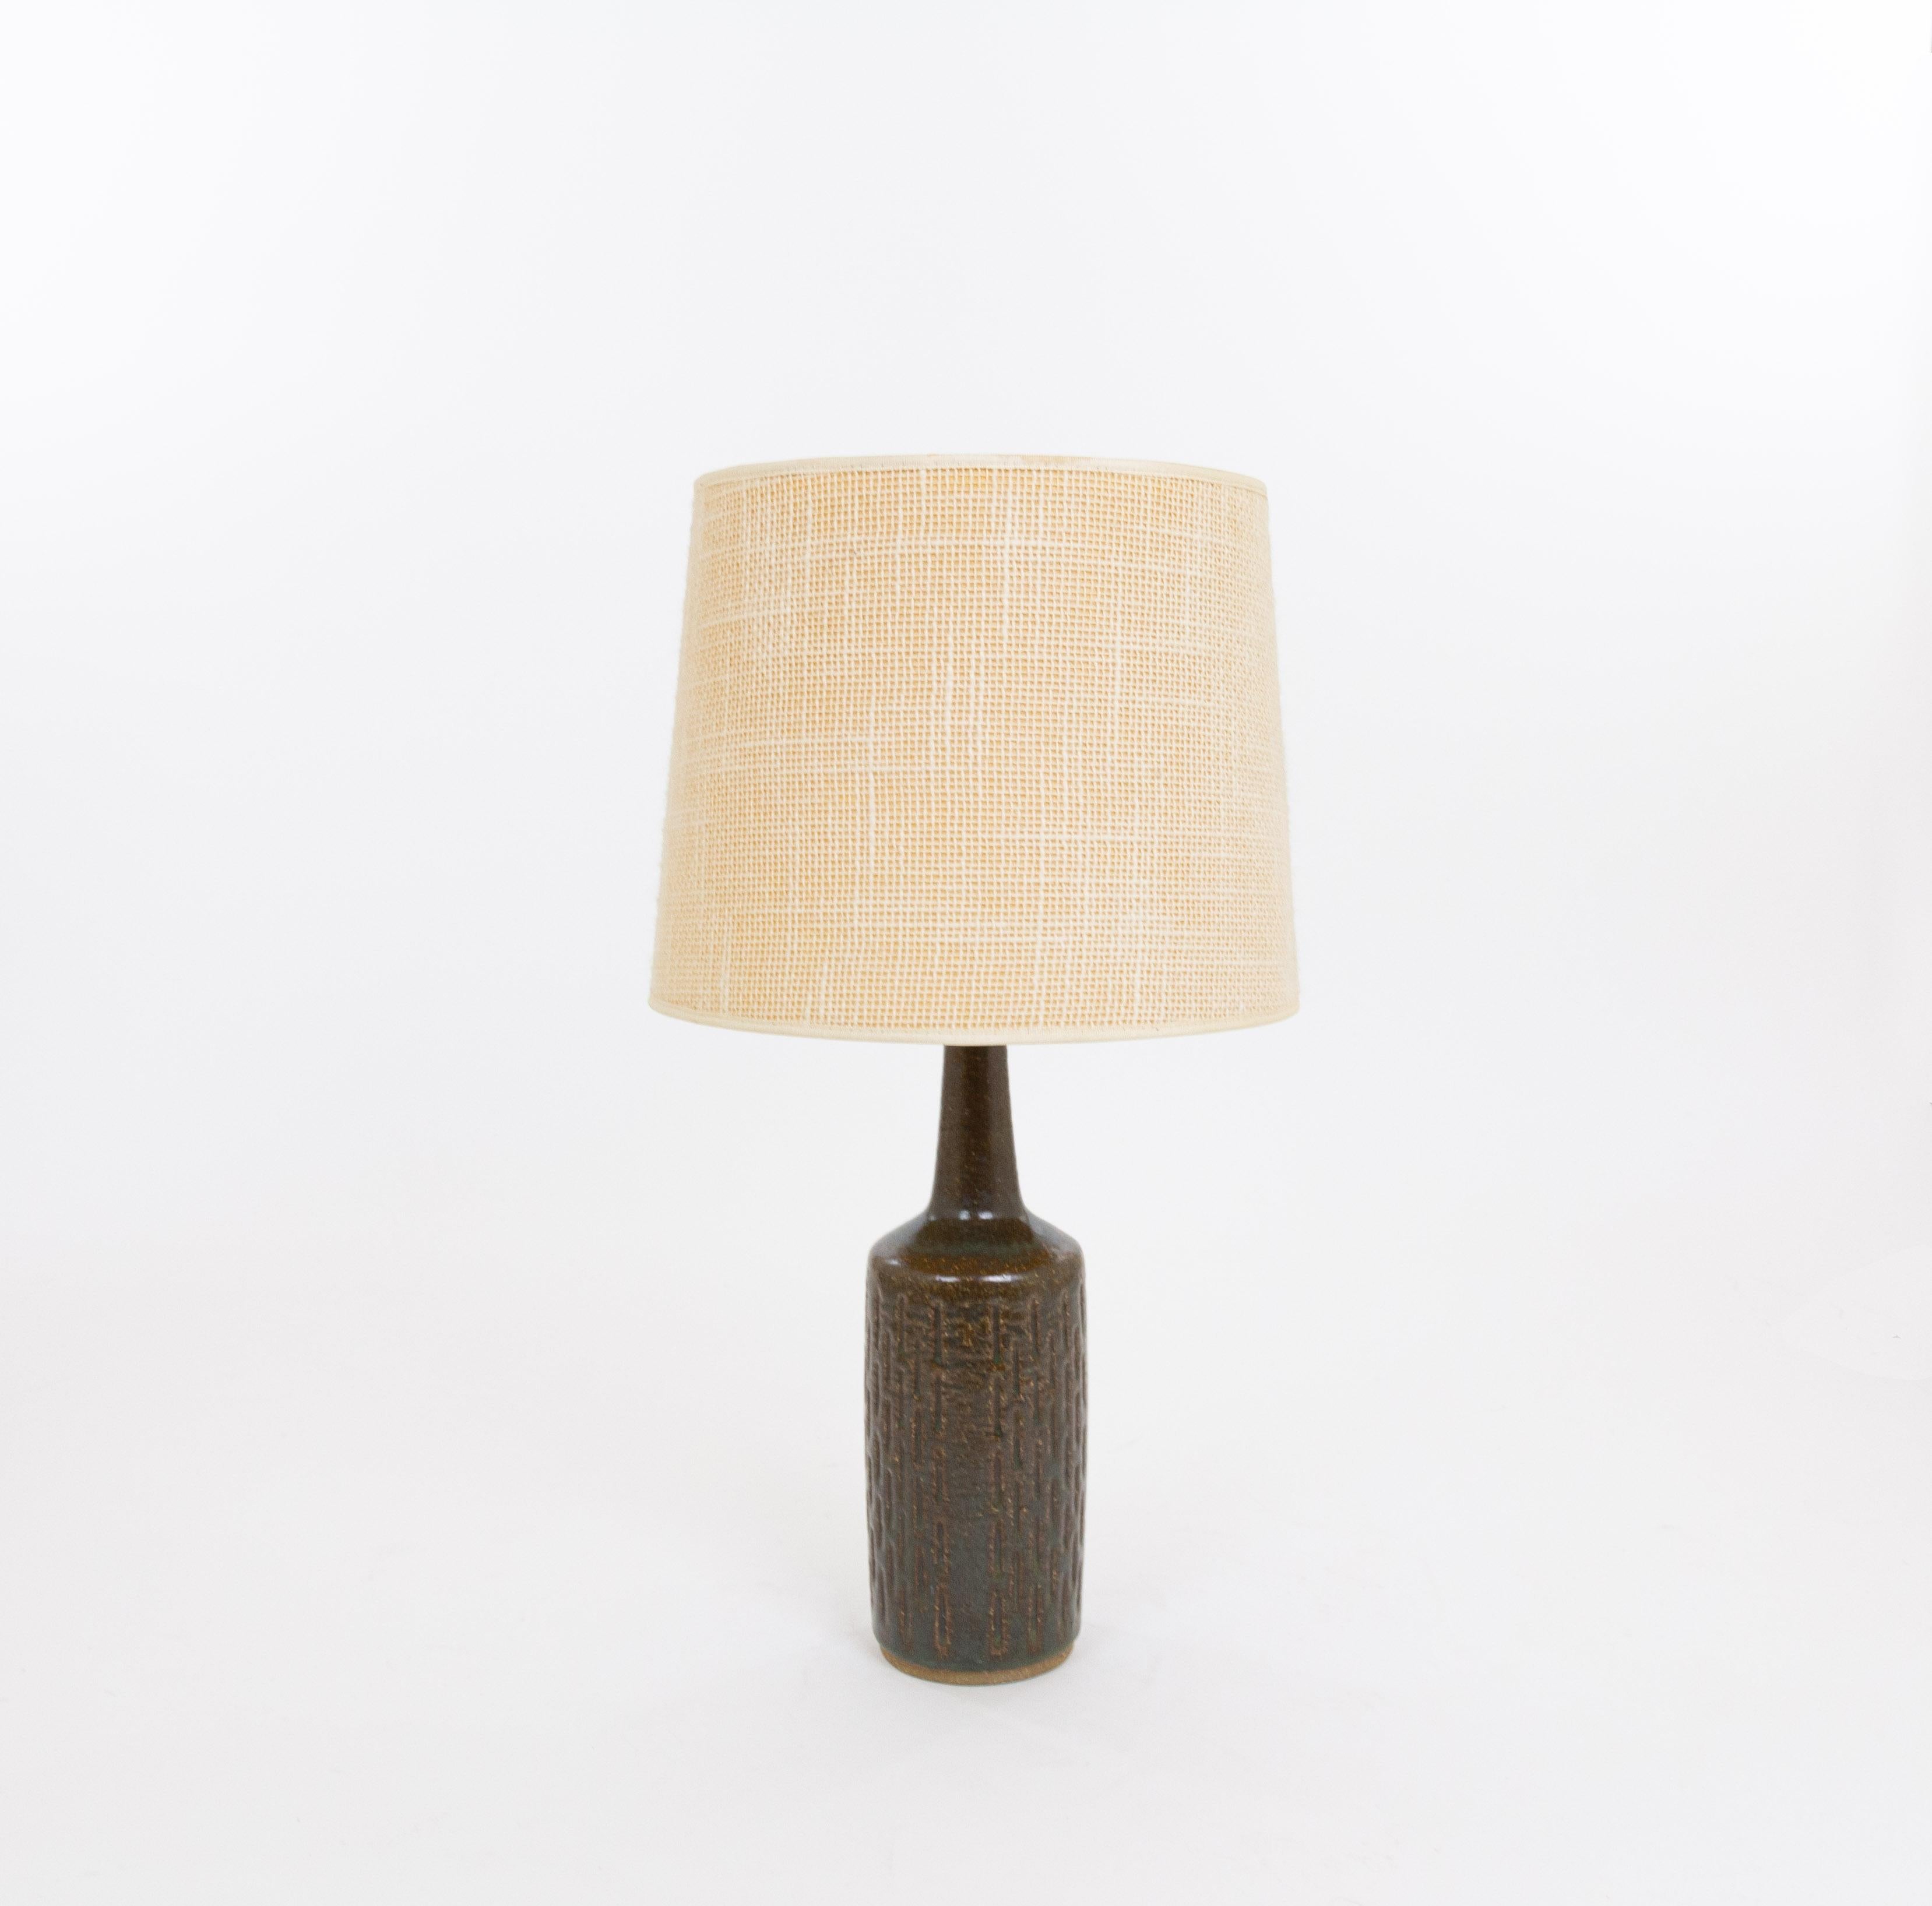 Model DL/30 table lamp made by Annelise and Per Linnemann-Schmidt for Palshus in the 1960s. The colour of the handmade decorated base is a Brown and Green blend. It has impressed patterns.

The lamp comes with its original lampshade holder. The